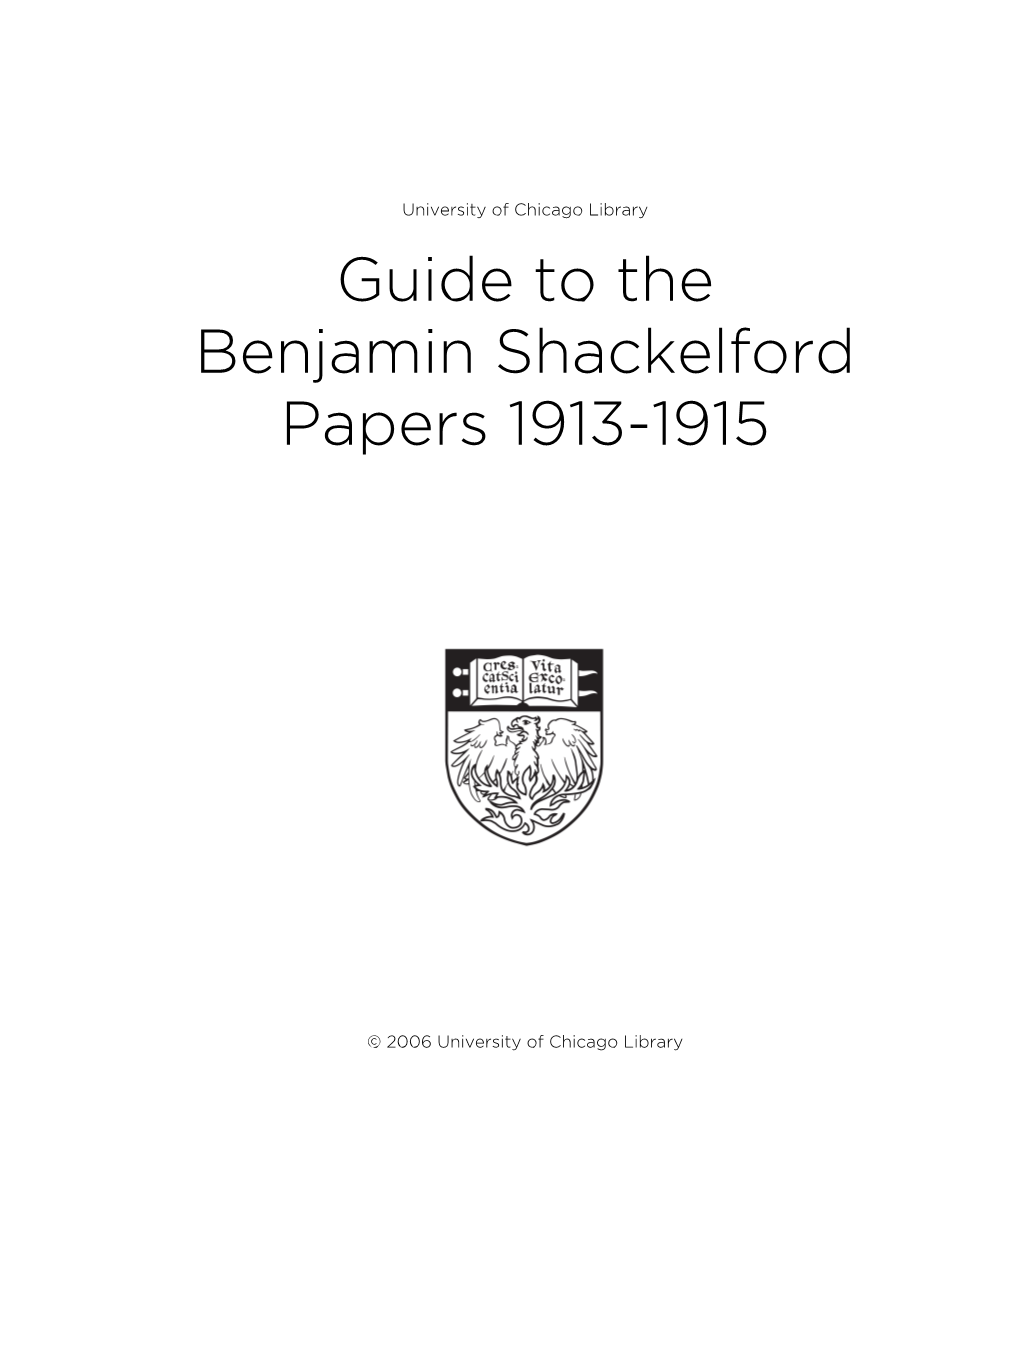 Guide to the Benjamin Shackelford Papers 1913-1915